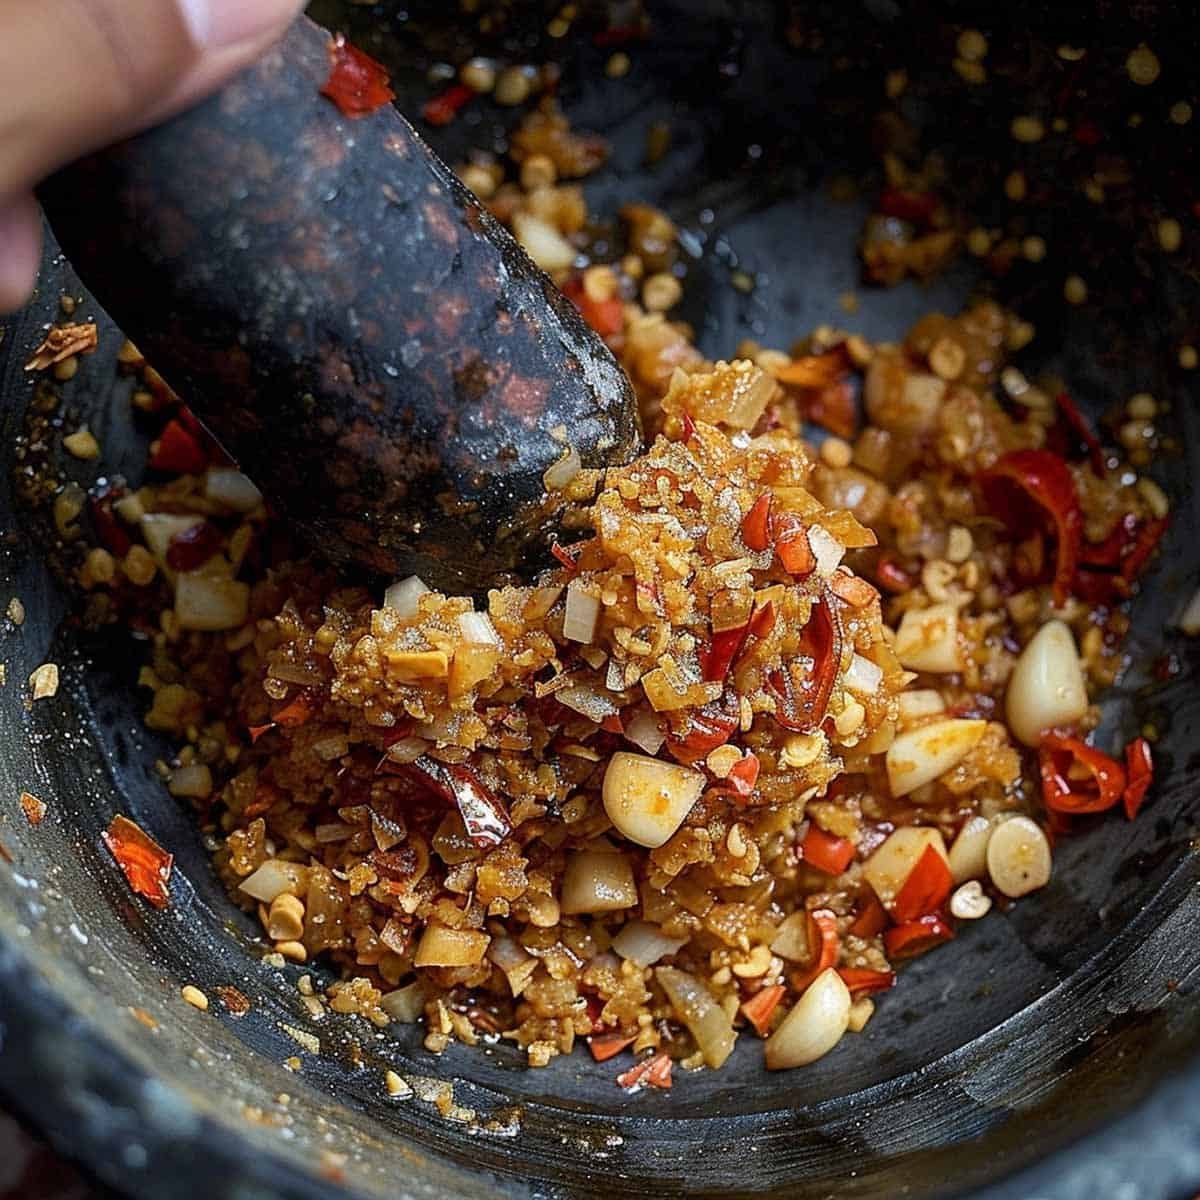 Chilies, garlic, and shallots being ground into a coarse paste in a mortar and pestle.
